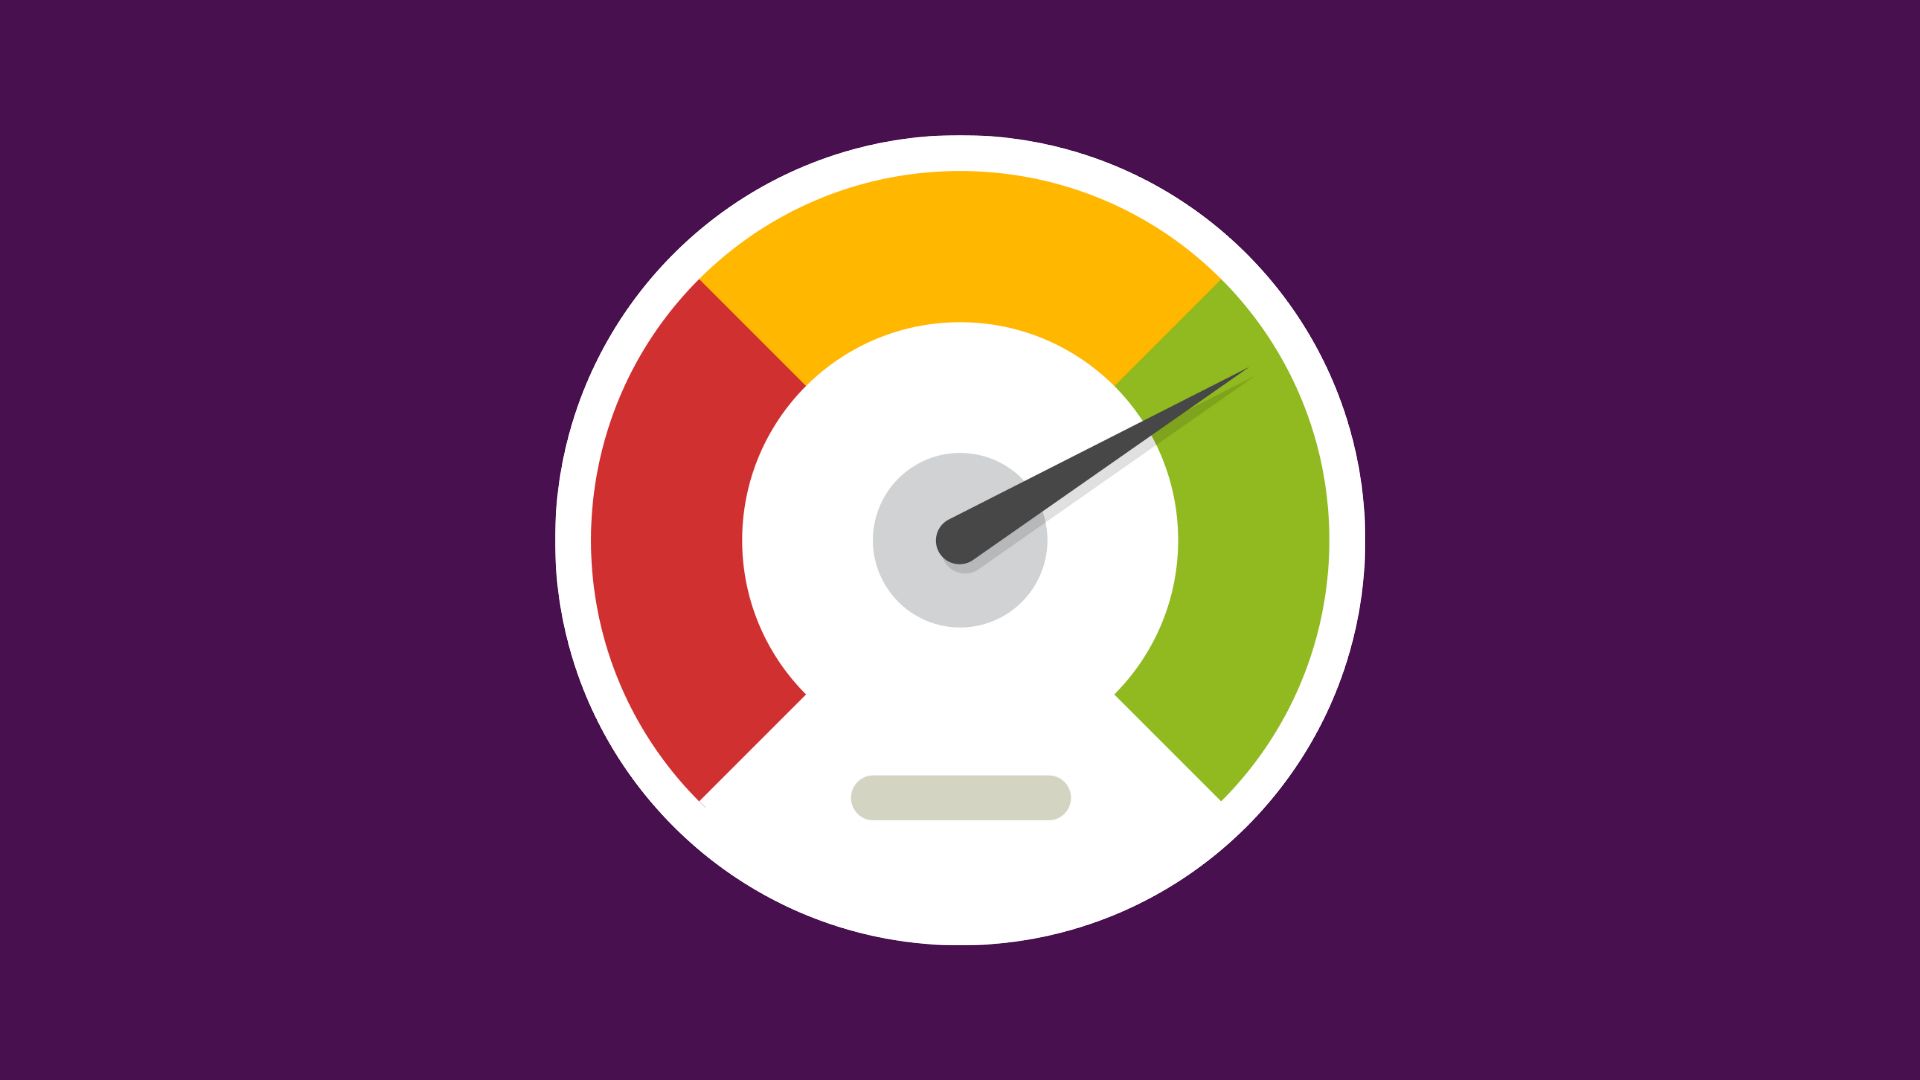 Purple background with icon showing a circular diagram representing a pressure gauge with green, yellow, and red sections and a dial